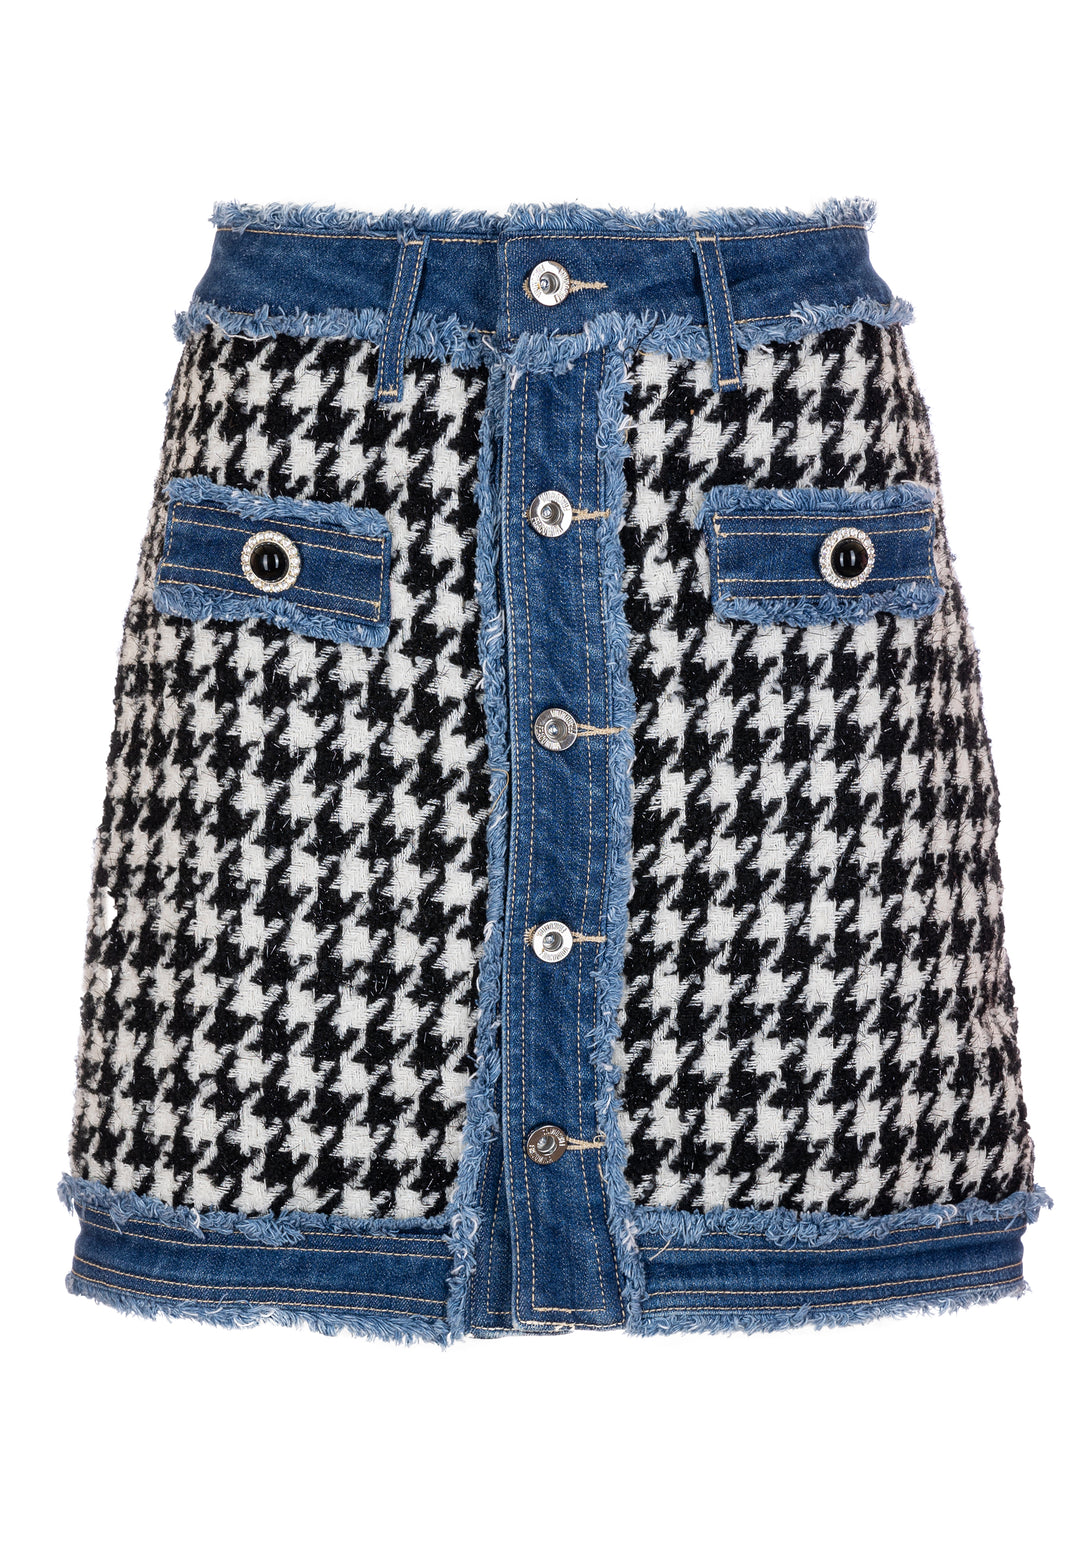 Mini skirt slim fit made in pied de poule fabric with denim details